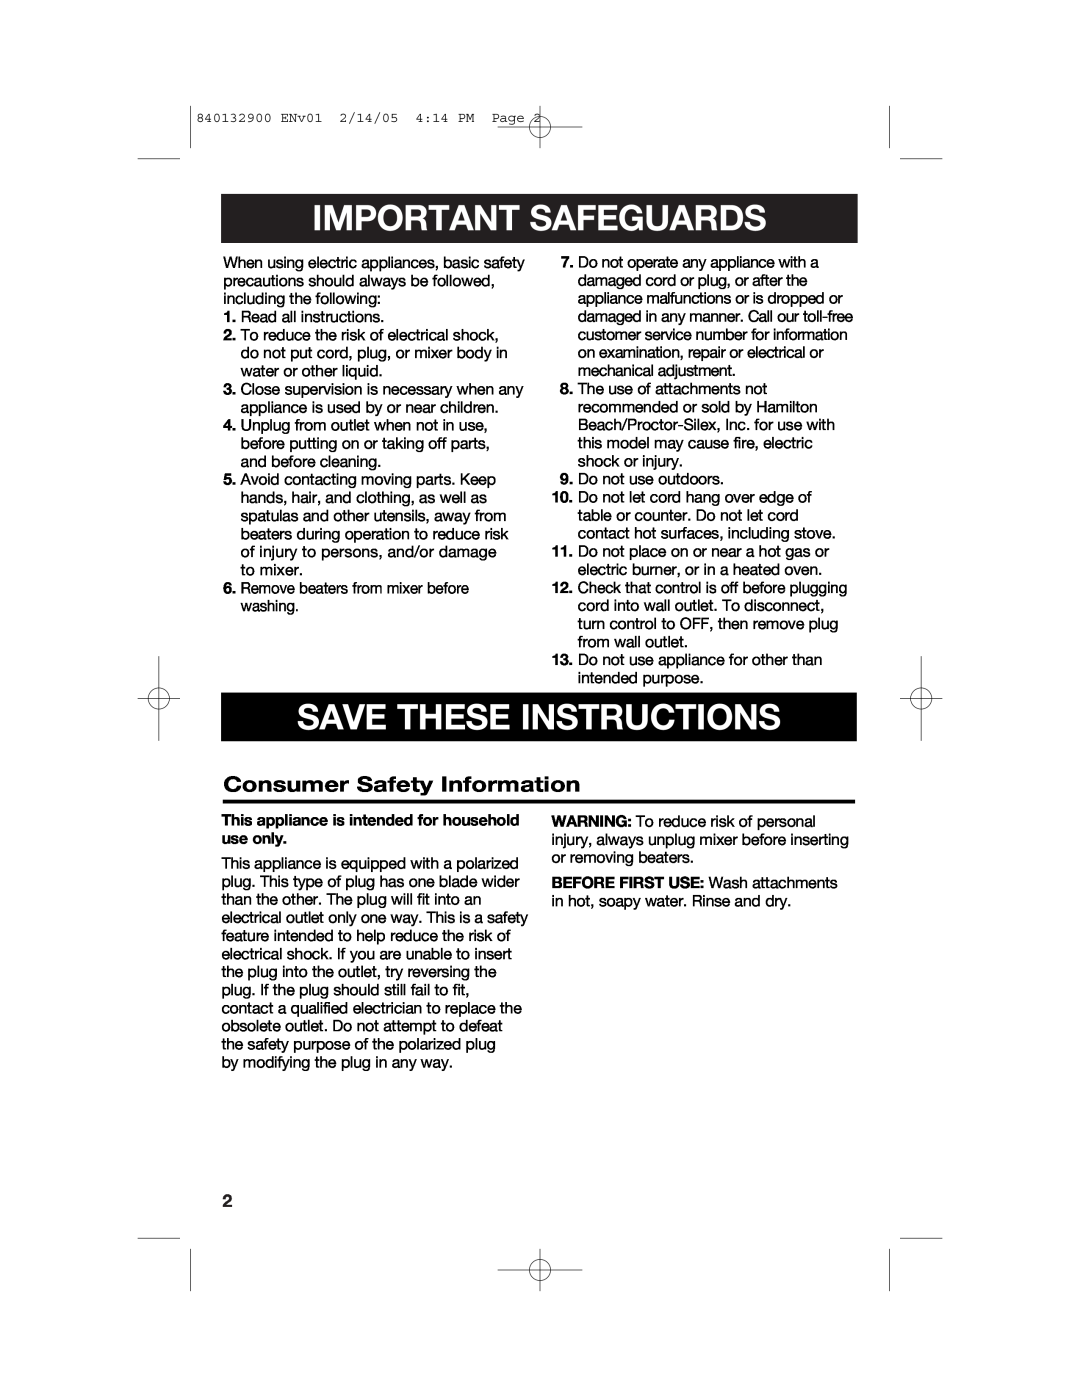 Hamilton Beach 840132900 manual Important Safeguards, Save These Instructions, Consumer Safety Information 